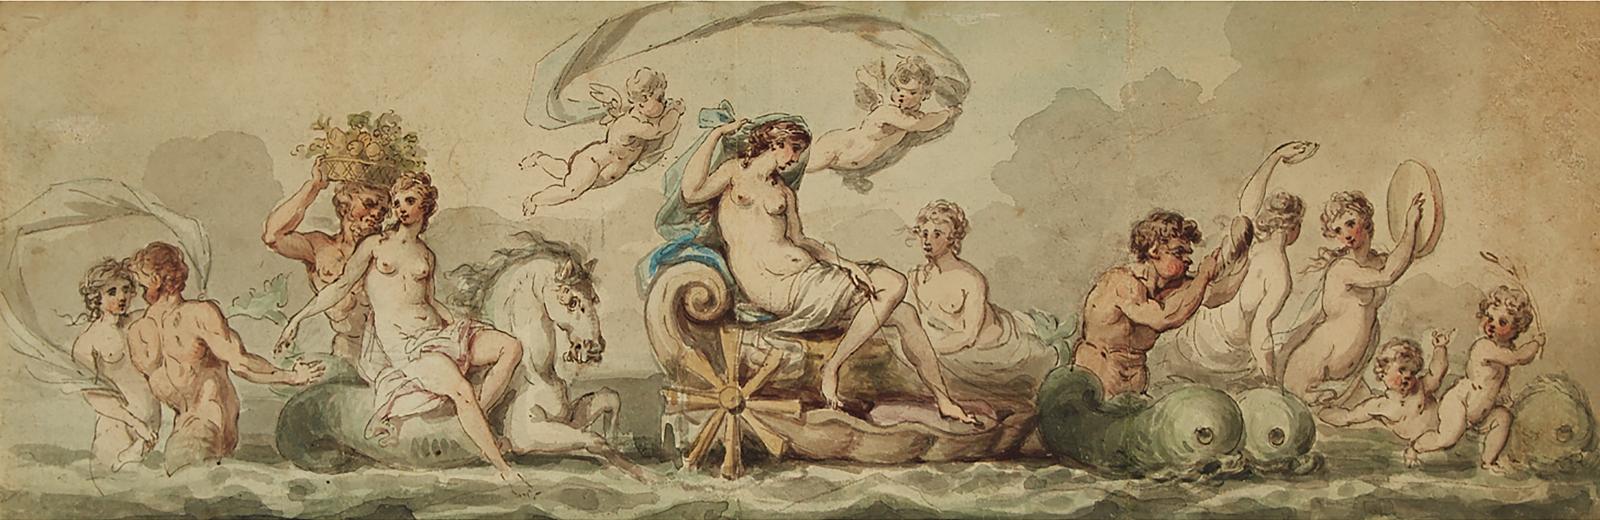 Giovanni Battista Cipriani (1727-1785) - Amphitrite Being Carried To Her Marriage With Poseidon